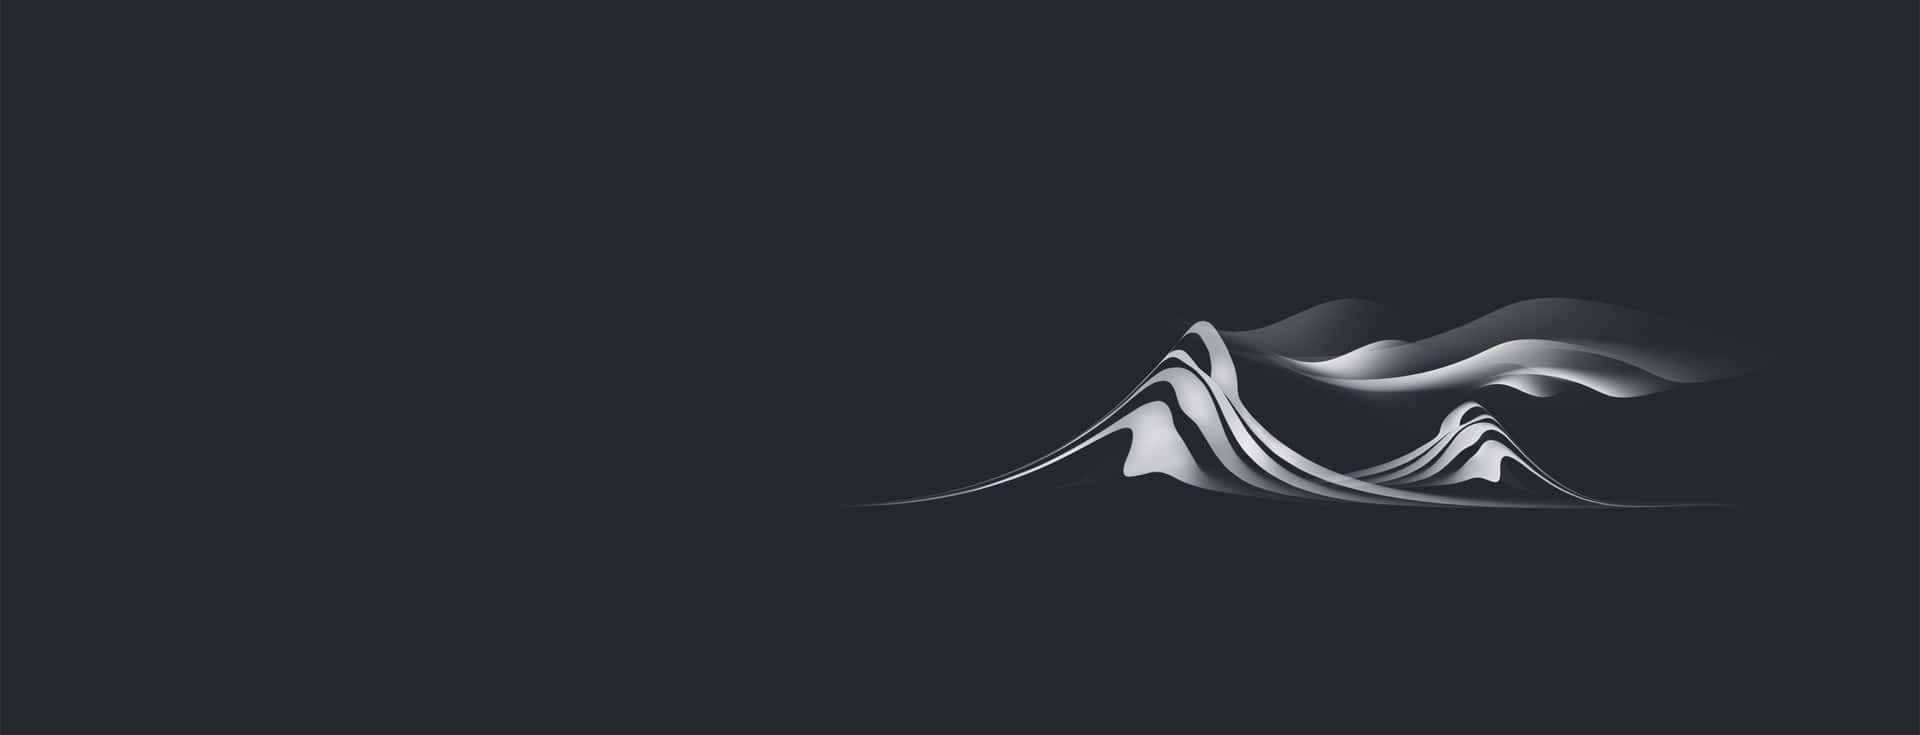 A Mountain Logo With Smoke Coming Out Of It Wallpaper